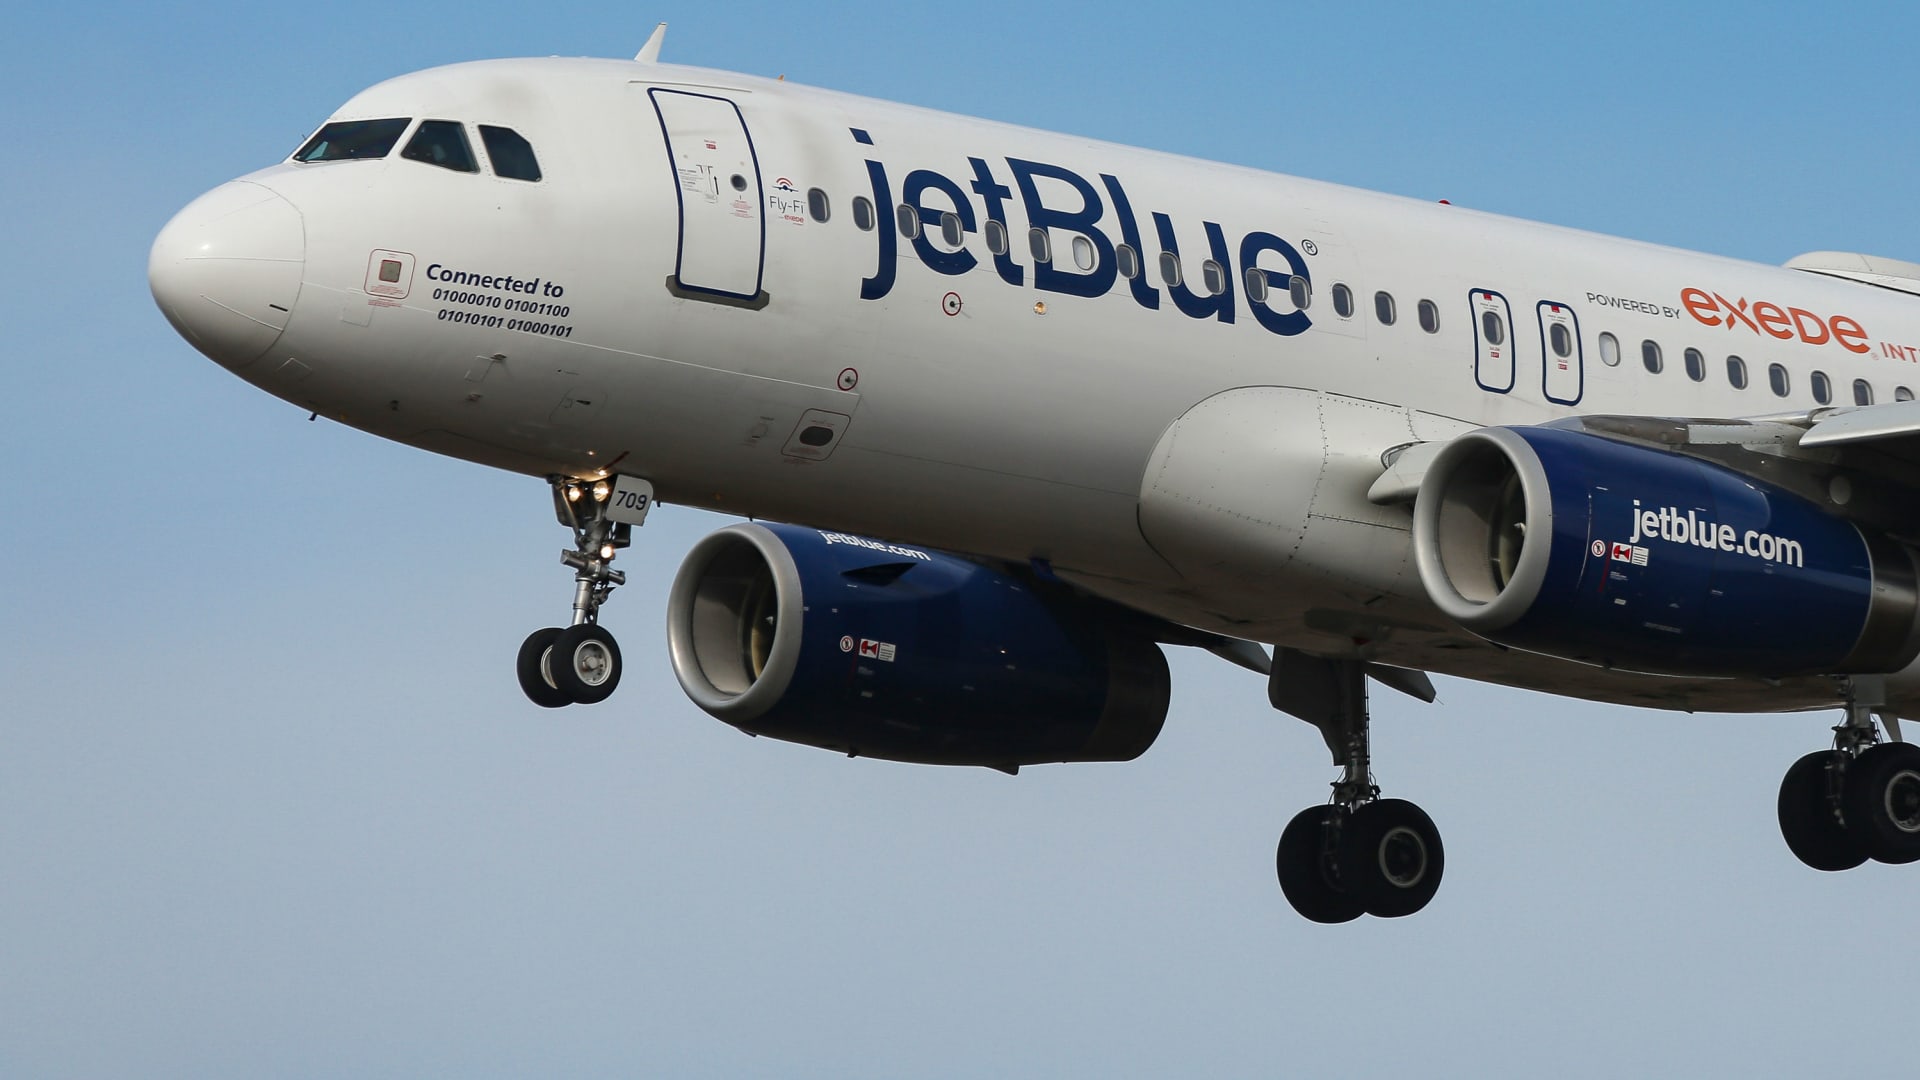 JetBlue shares tumble as costs push it to a loss despite profit forecast on higher fares